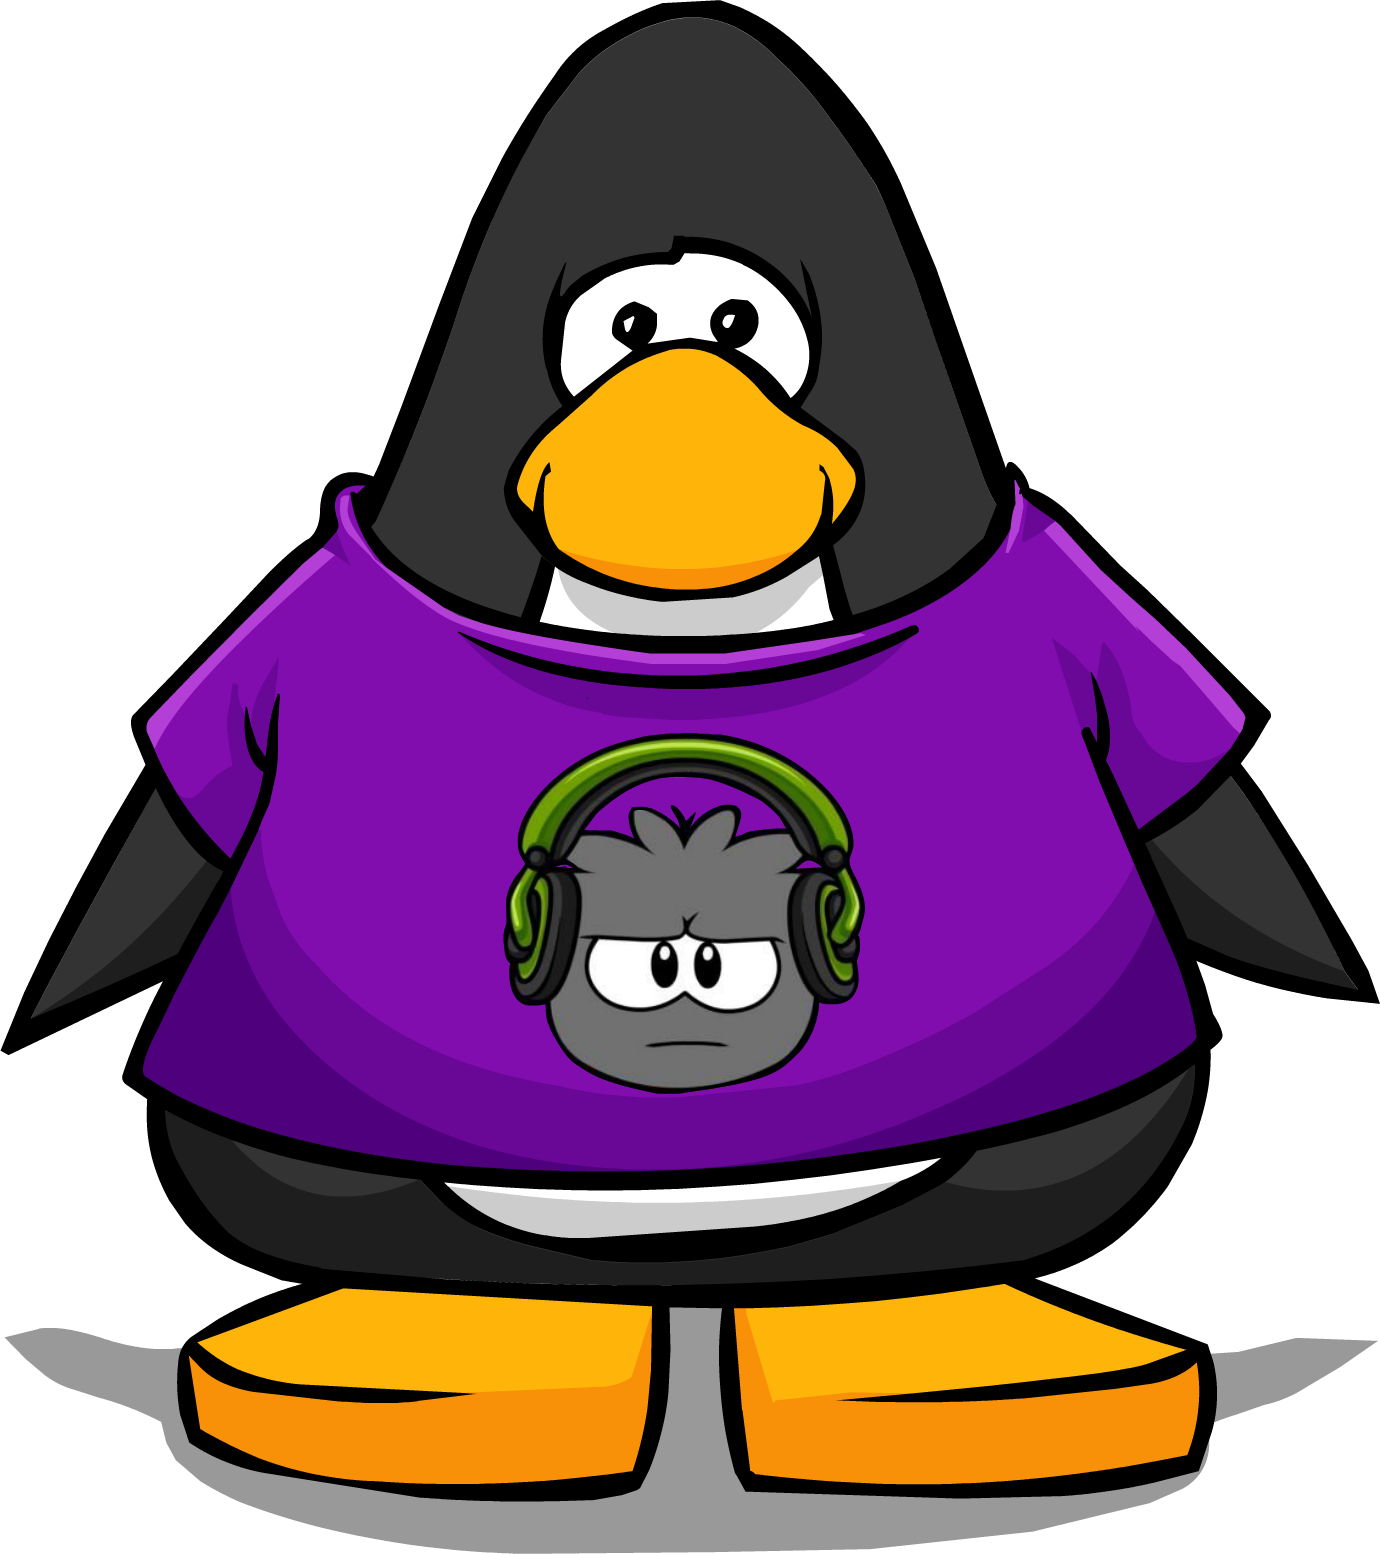 Dubstep Puffle T-shirt From A Player Card - Club Penguin Penguin Band Hoodie (1380x1554)